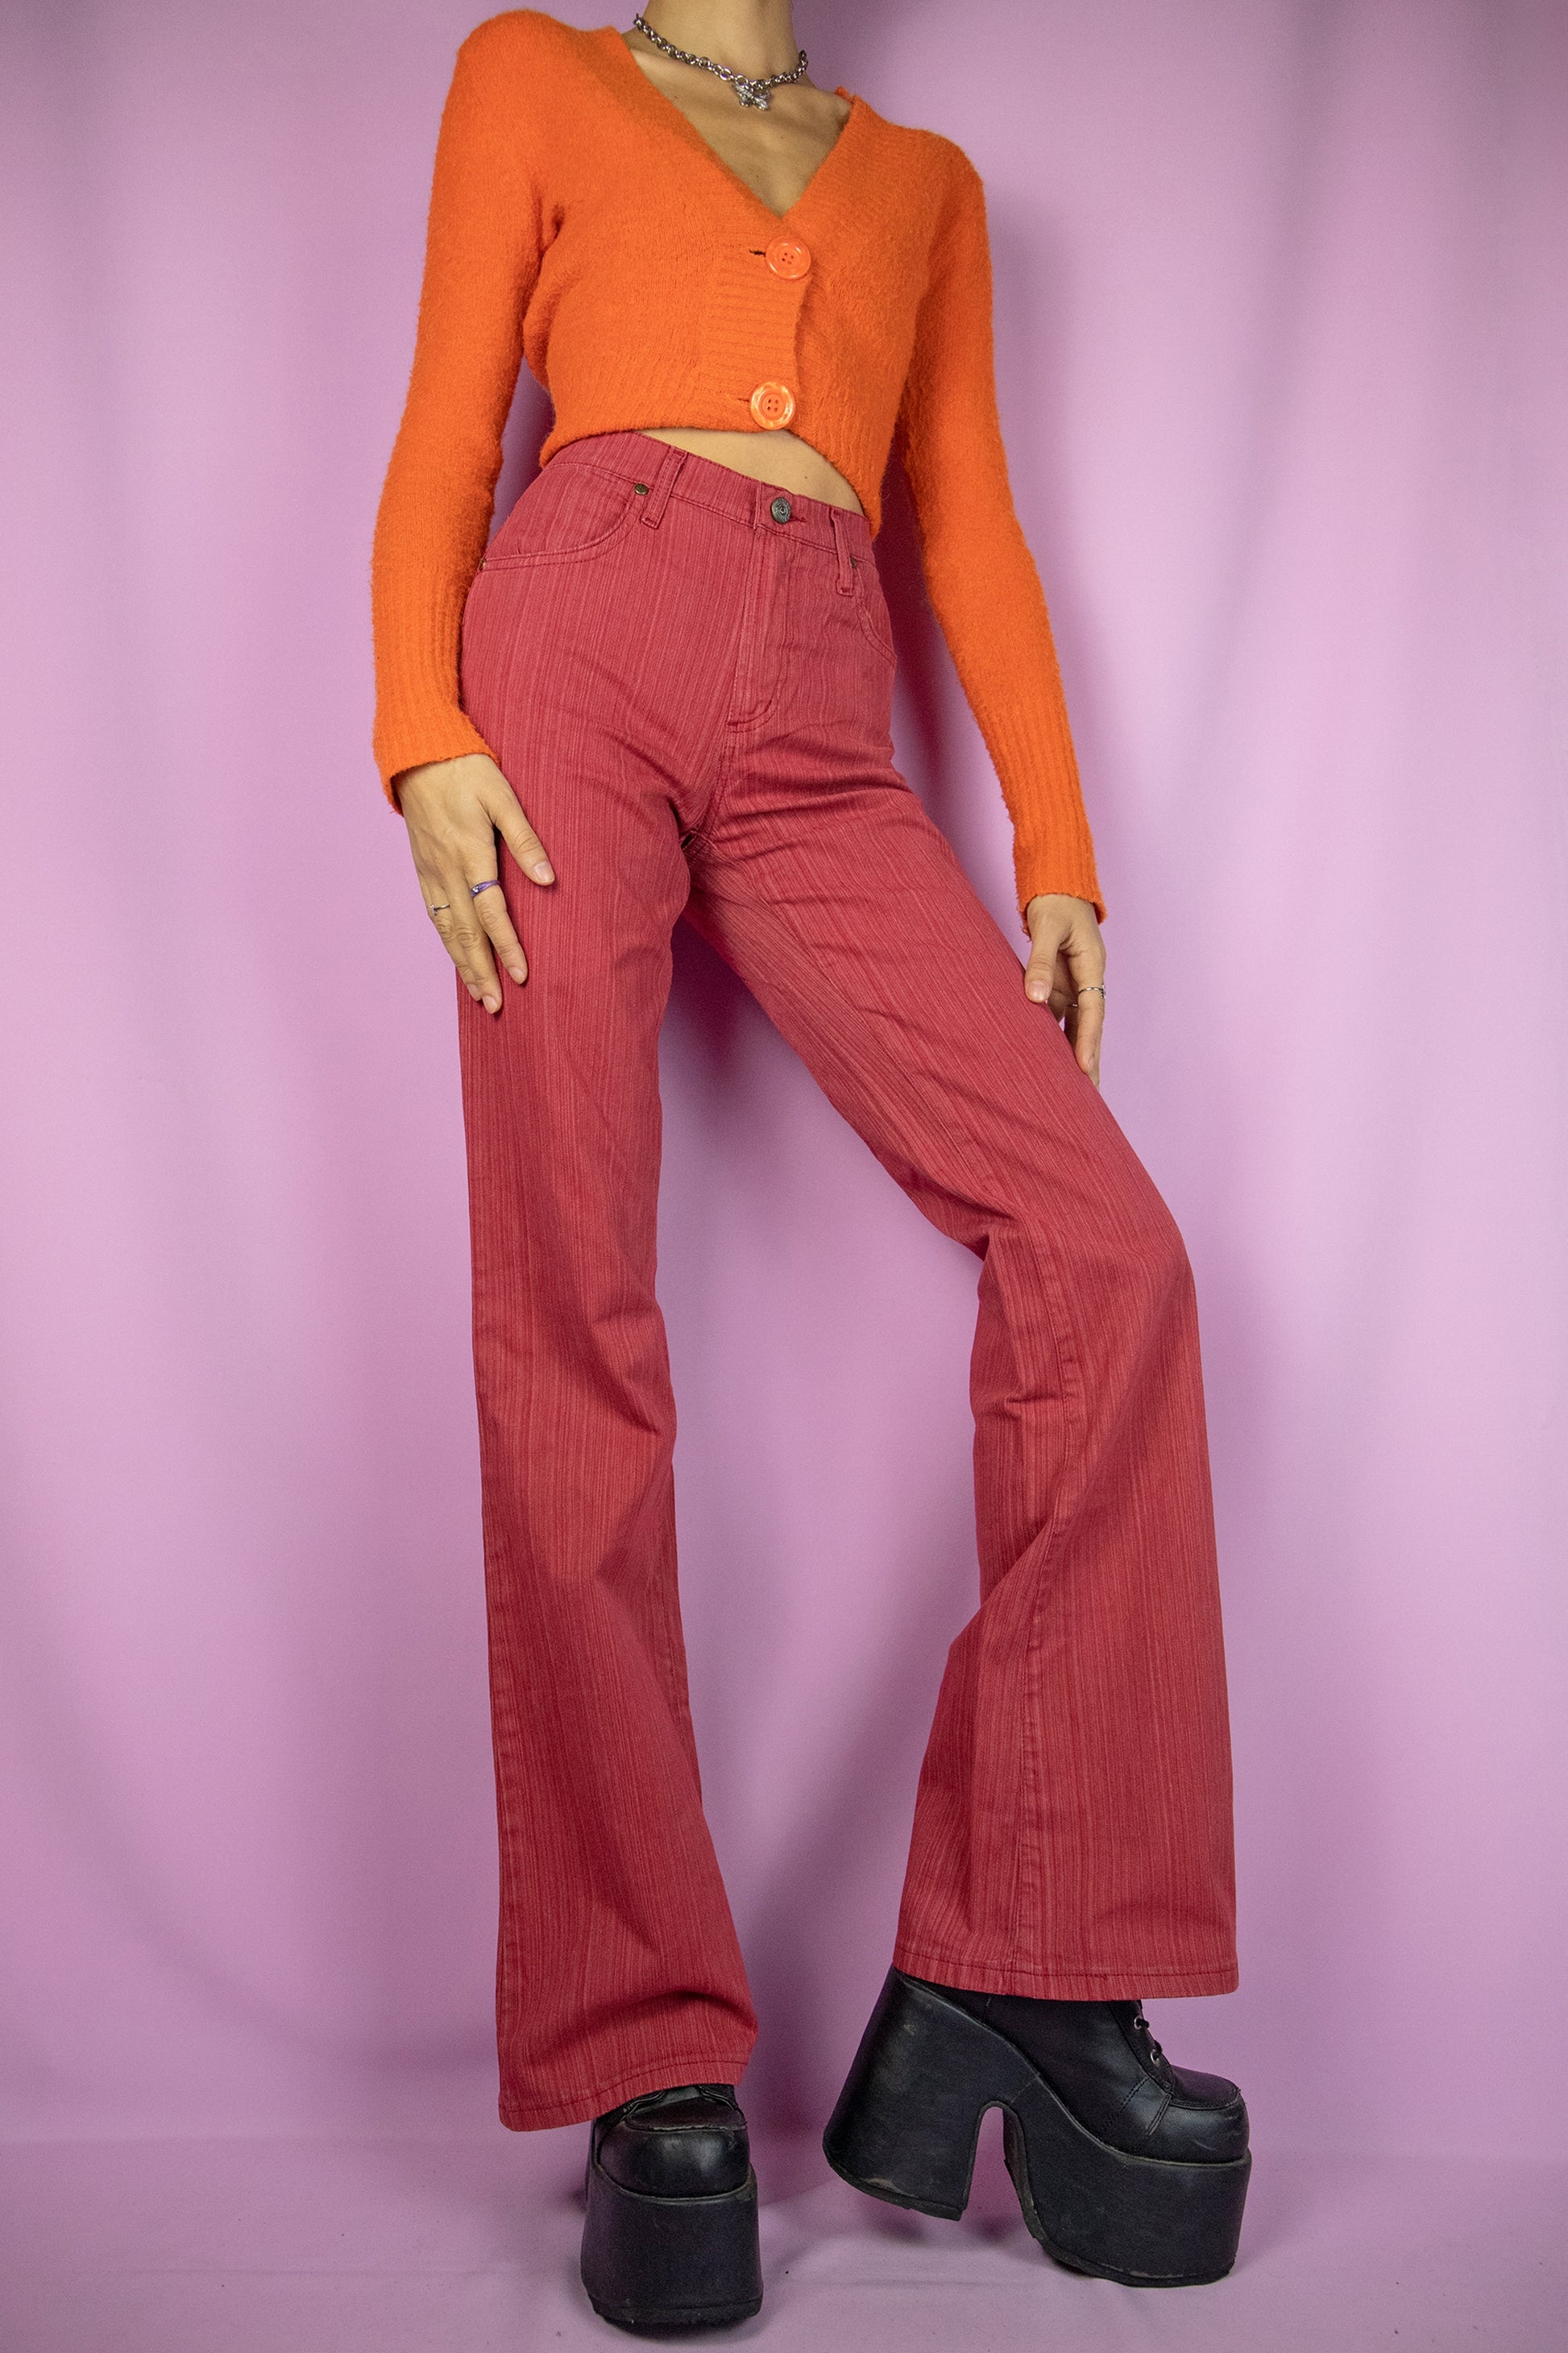 The Vintage Y2K Red Flare Jeans are slightly stretchy wide flared red striped pants with pockets. Cute 2000s cyber trousers.